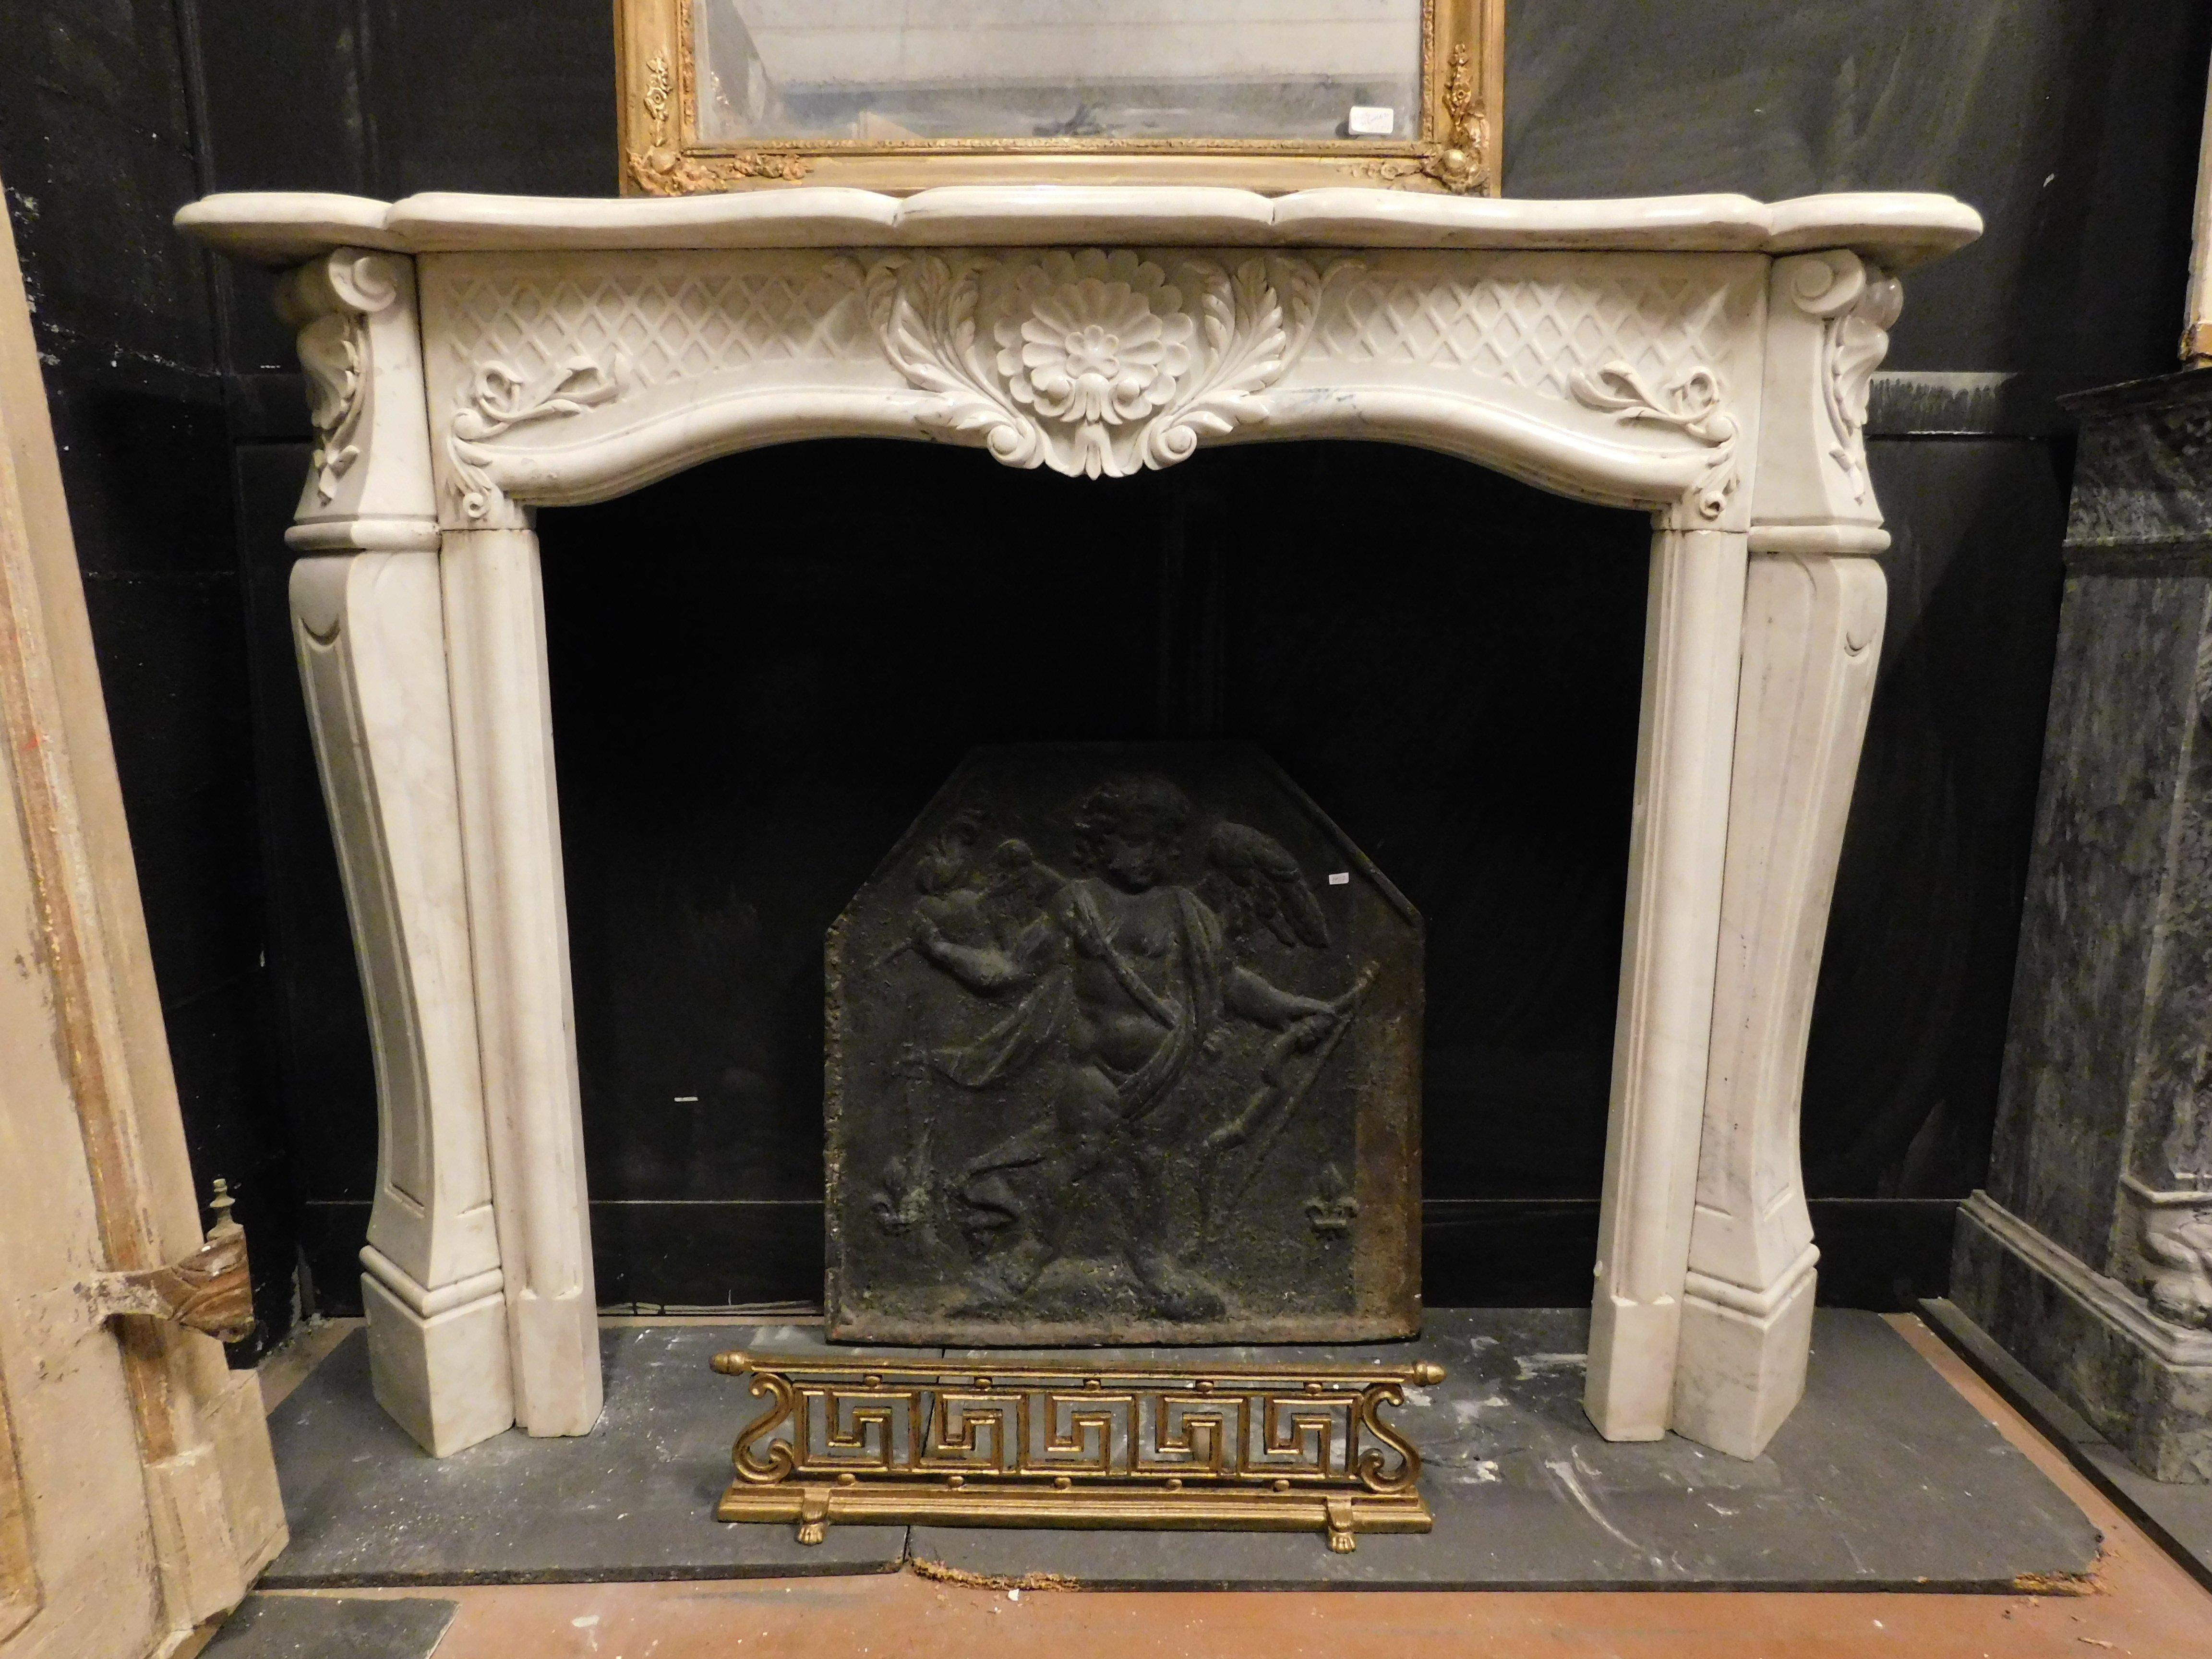 Ancient antique fireplace in white Carrara marble, richly hand-sculpted with floral and leaf decorations, built in the 19th century for a palace in Italy, maximum external measurement cm W 144 x H 110 x D 30, internal mouth measurement cm W 95 x H